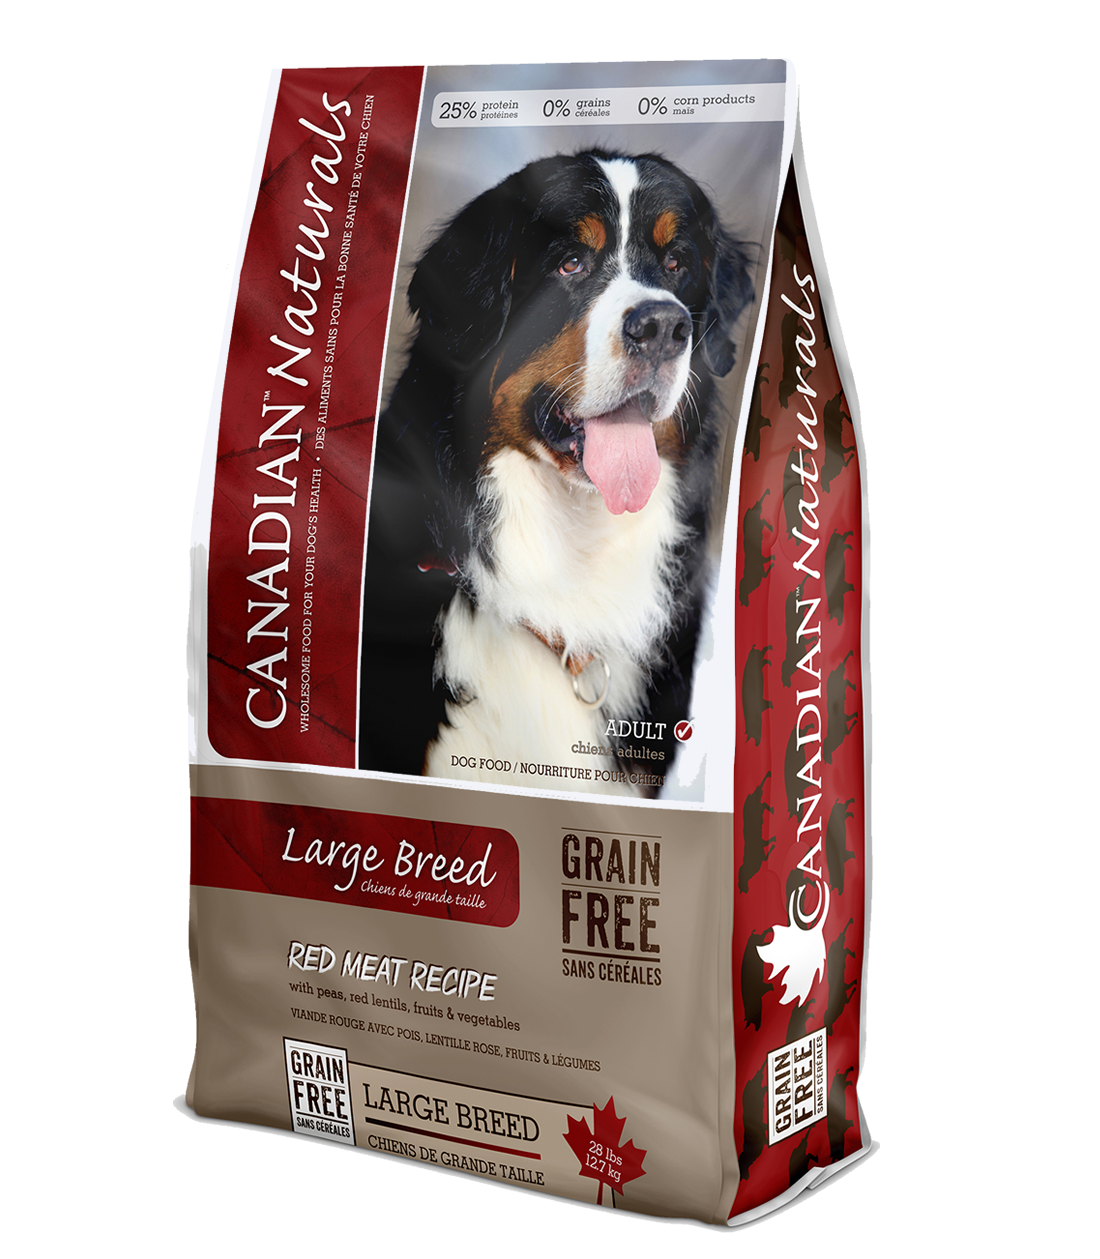 Canadian Naturals - Red Meat Recipe for Large Breed Dogs